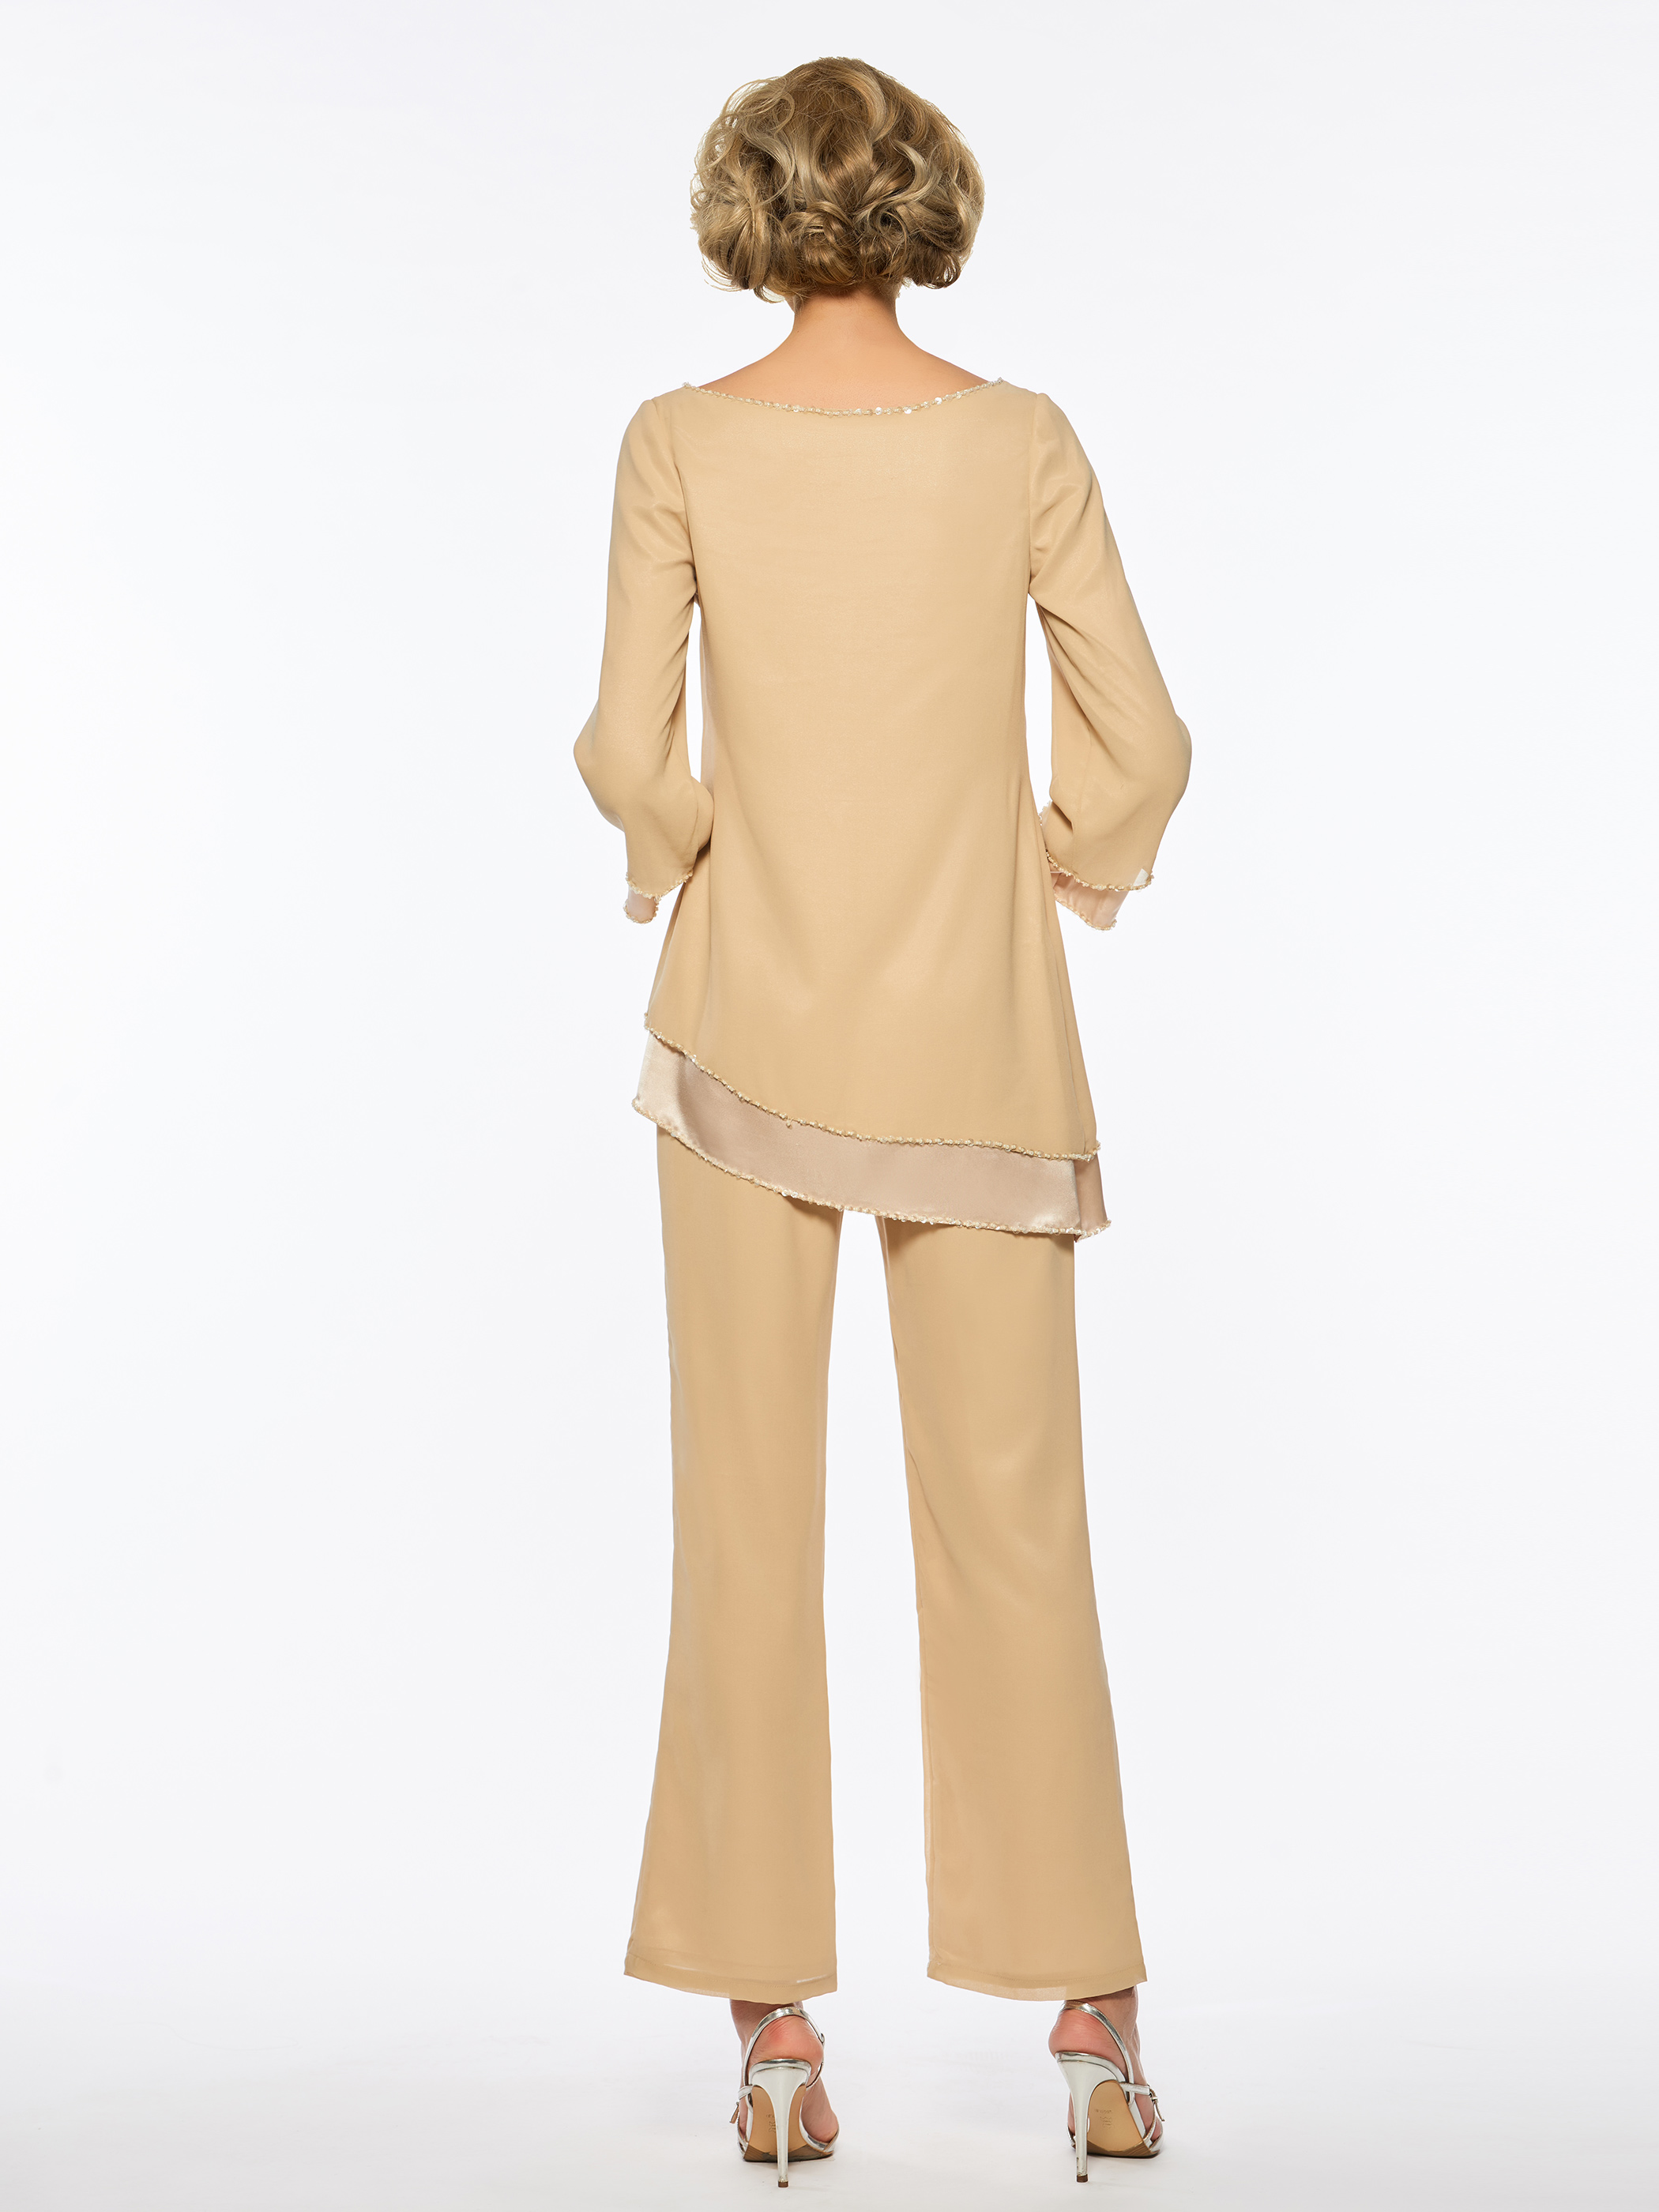 Floor-Length Scoop Long Sleeves A-Line Mother Of The Bride Pant Suit 3 Piece Chiffon